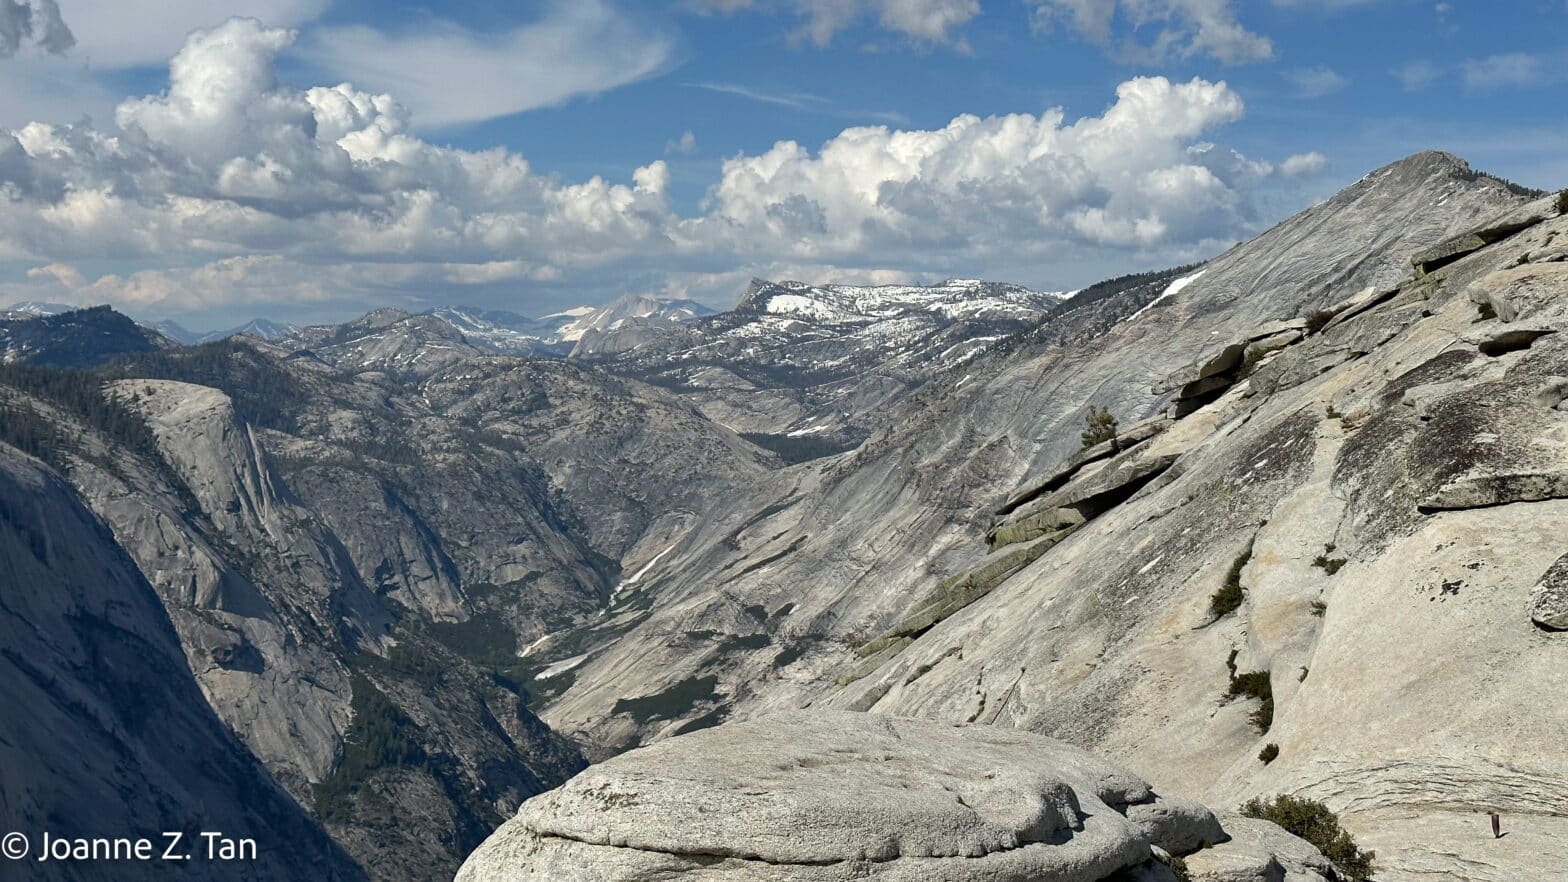 View of Clouds Rest & Yosemite Valley from Half Dome by Joanne Z. Tan, writer, award-winning photographer & poet, global top brand strategist, branding expert.